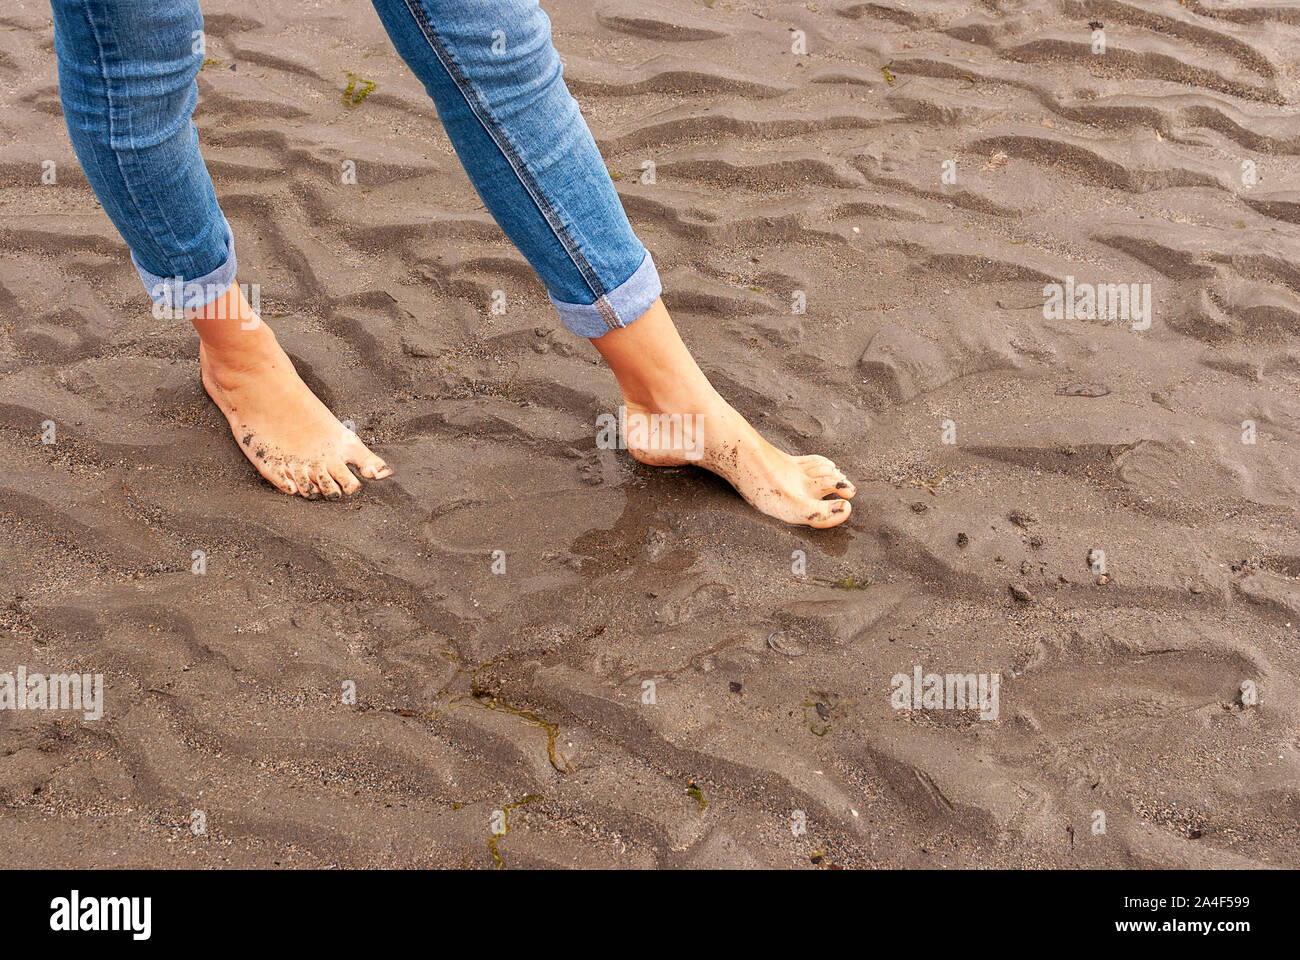 Young woman walking and playing on sandy beach and leaving footprints in the beach. Killbrittain, Kilbrittain beach, Ireland. Stock Photo